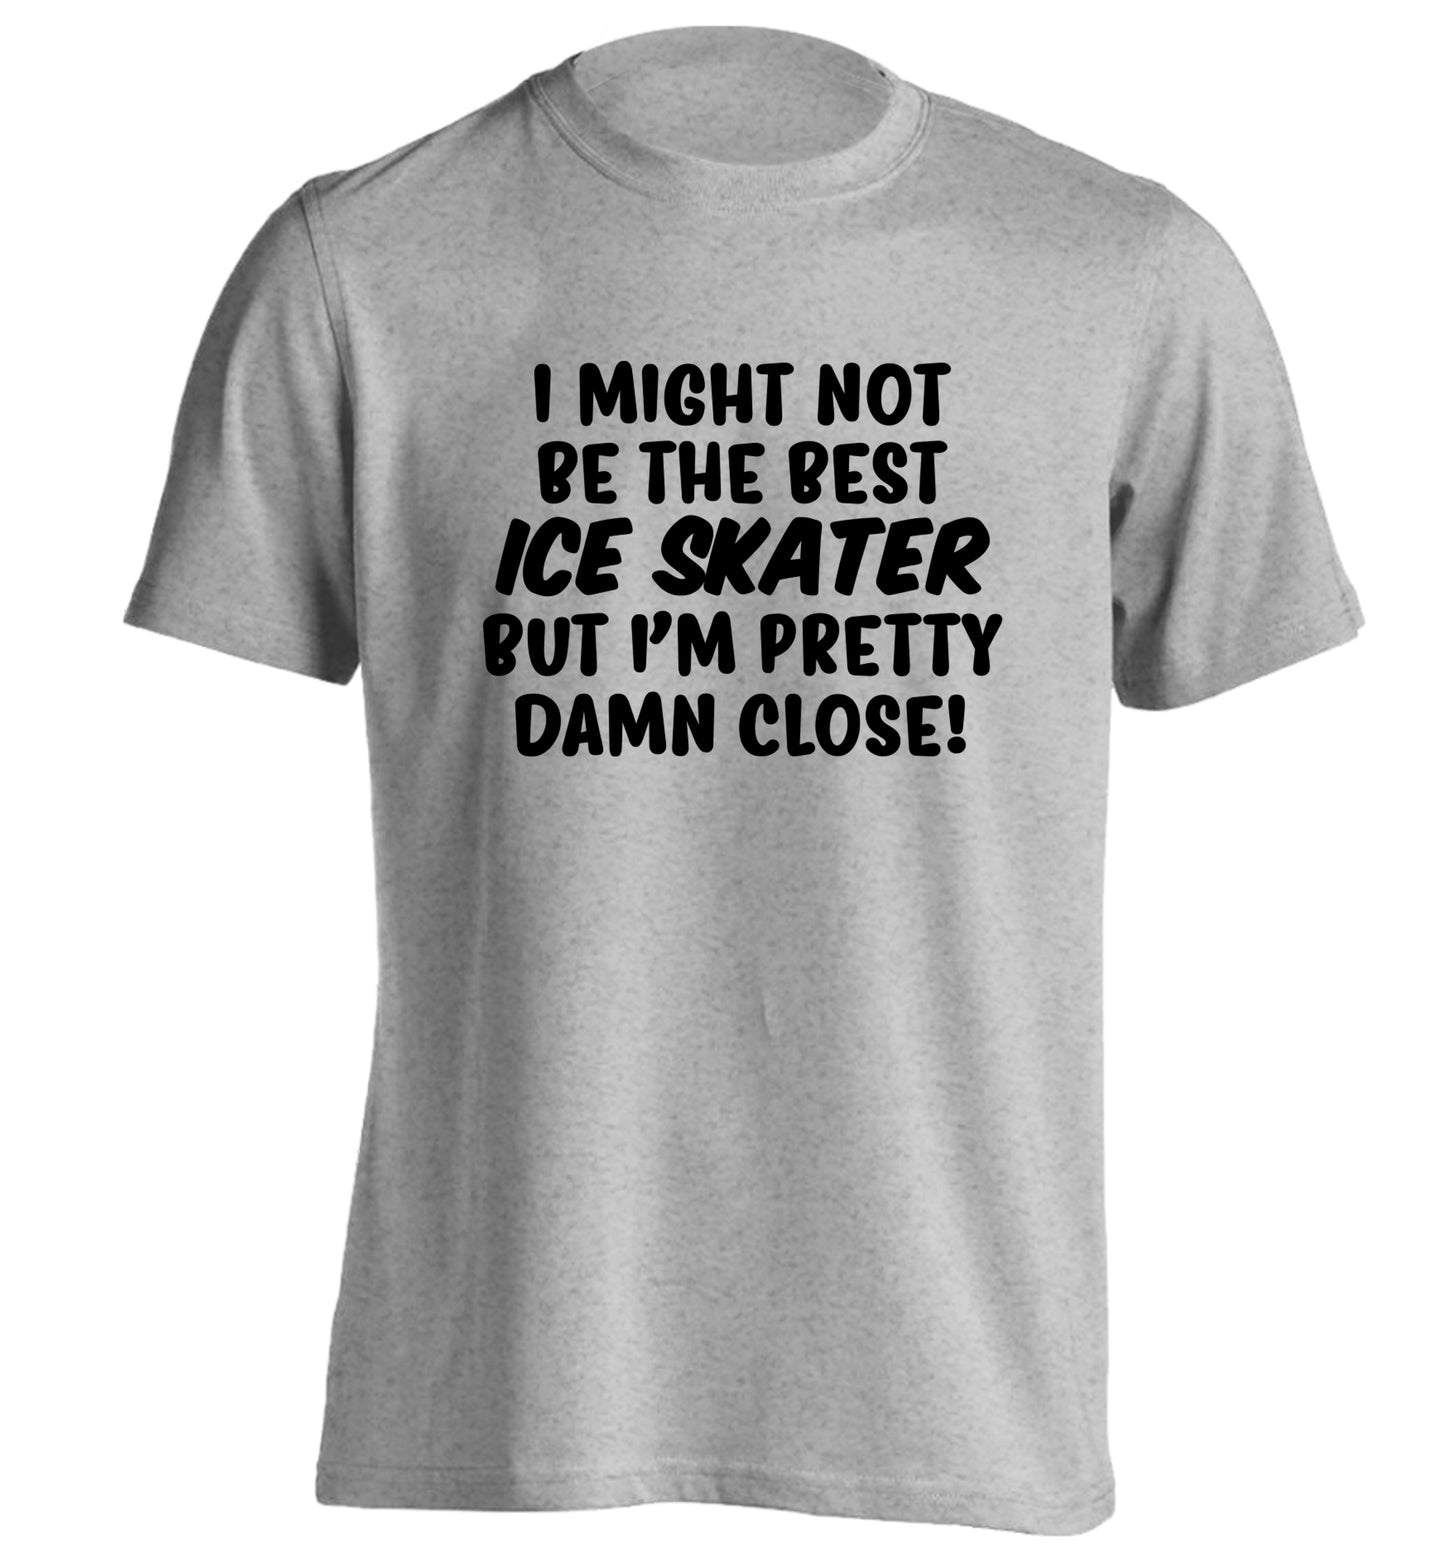 I might not be the best ice skater but I'm pretty damn close! adults unisexgrey Tshirt 2XL